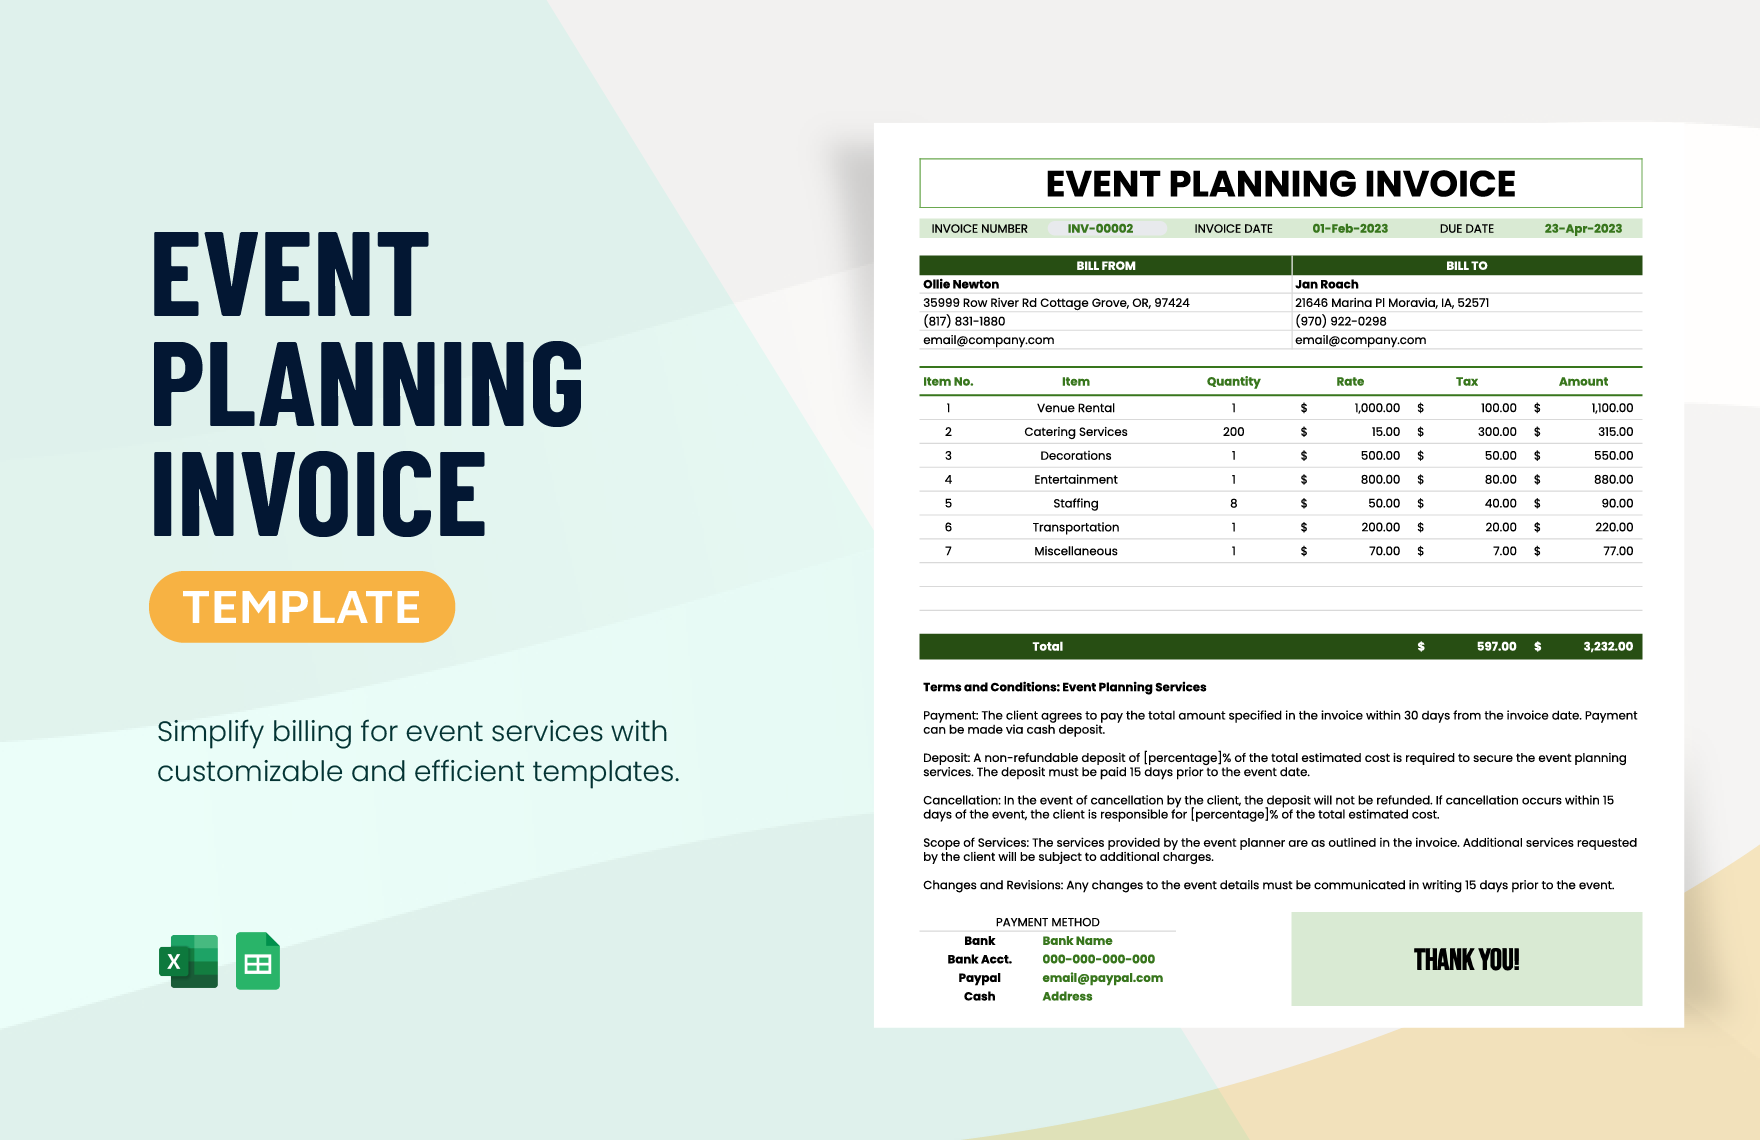 Event Planning Invoice Template in Excel, Google Sheets